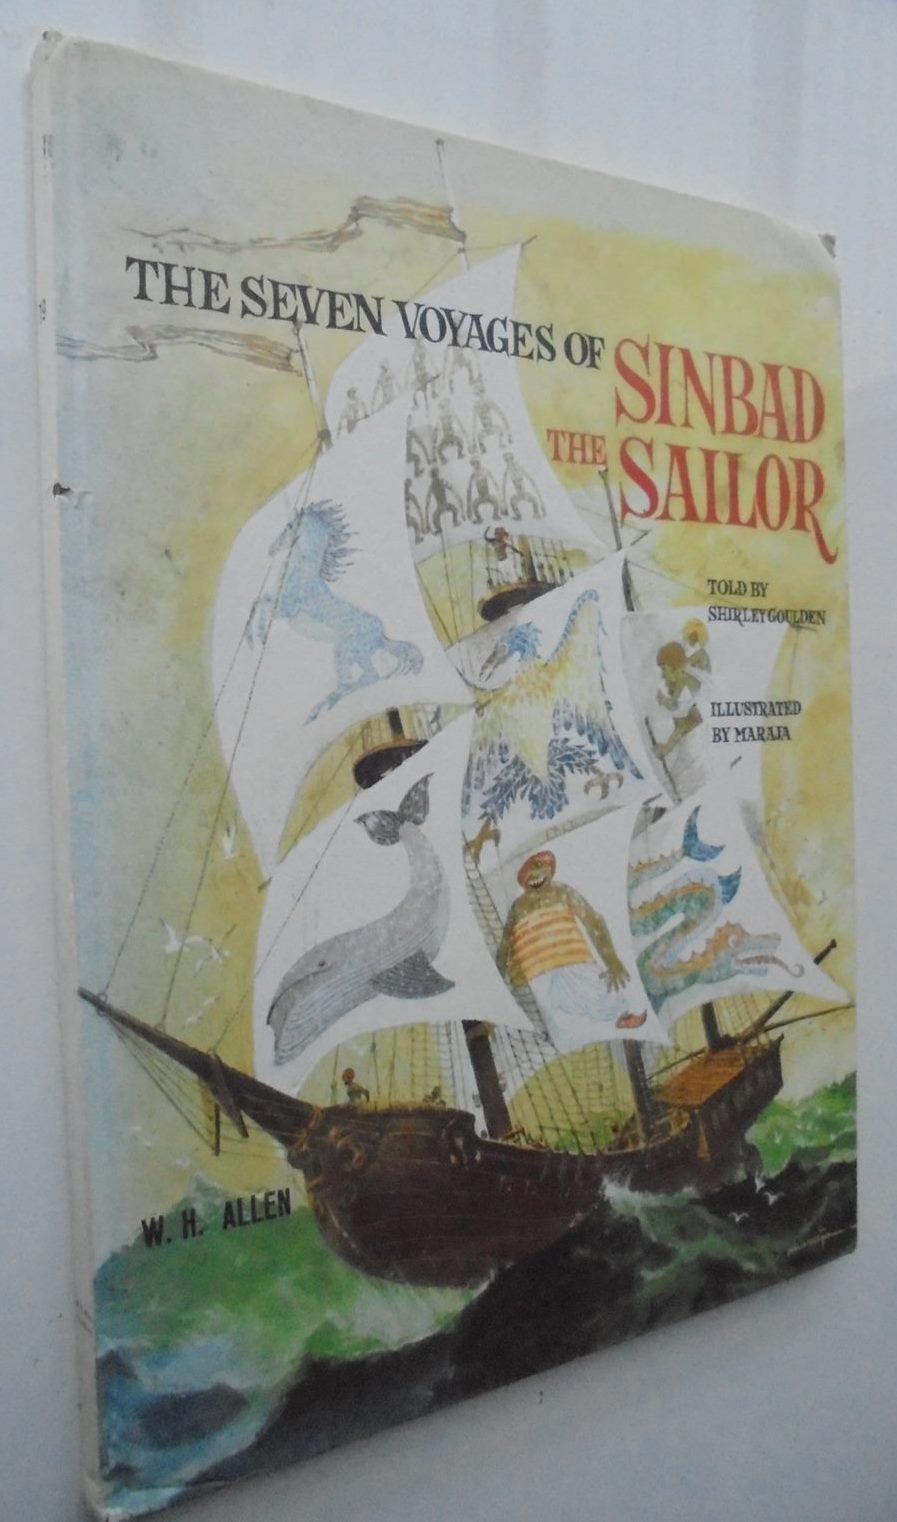 The Seven Voyages Of Sinbad The Sailor Told by Shirley Goulden.